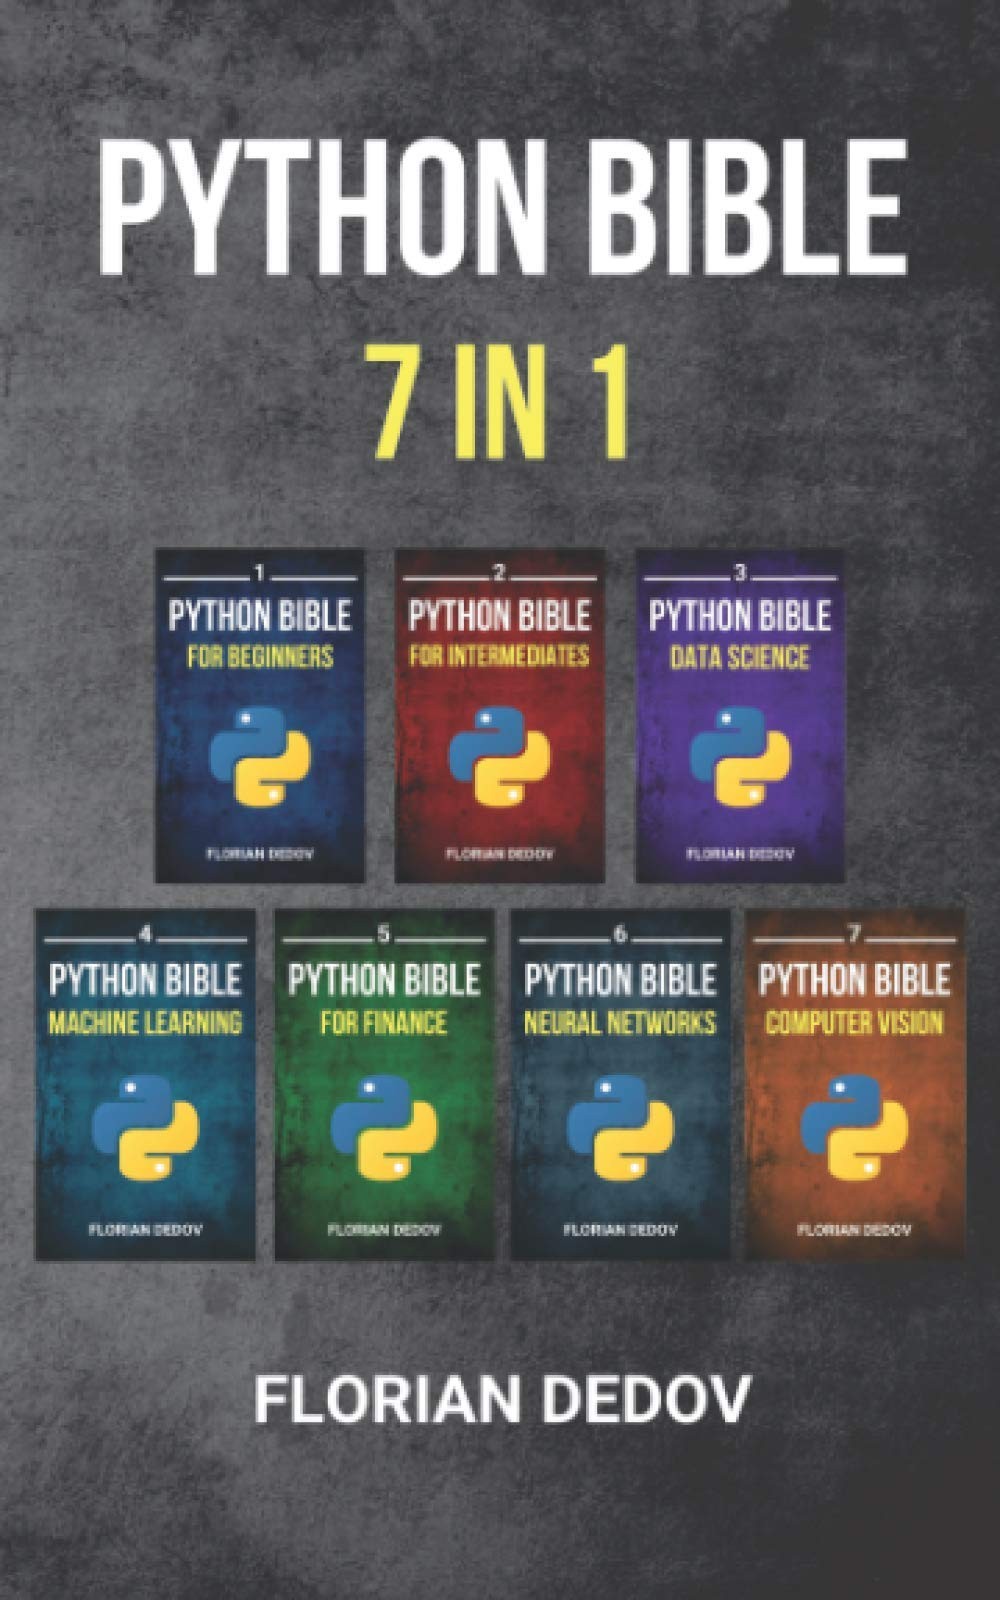 The Python Bible 7 in 1: Volumes One to Seven (Beginner, Intermediate, Data Science, Machine Learning, Finance, Neural Networks, Computer Vision)